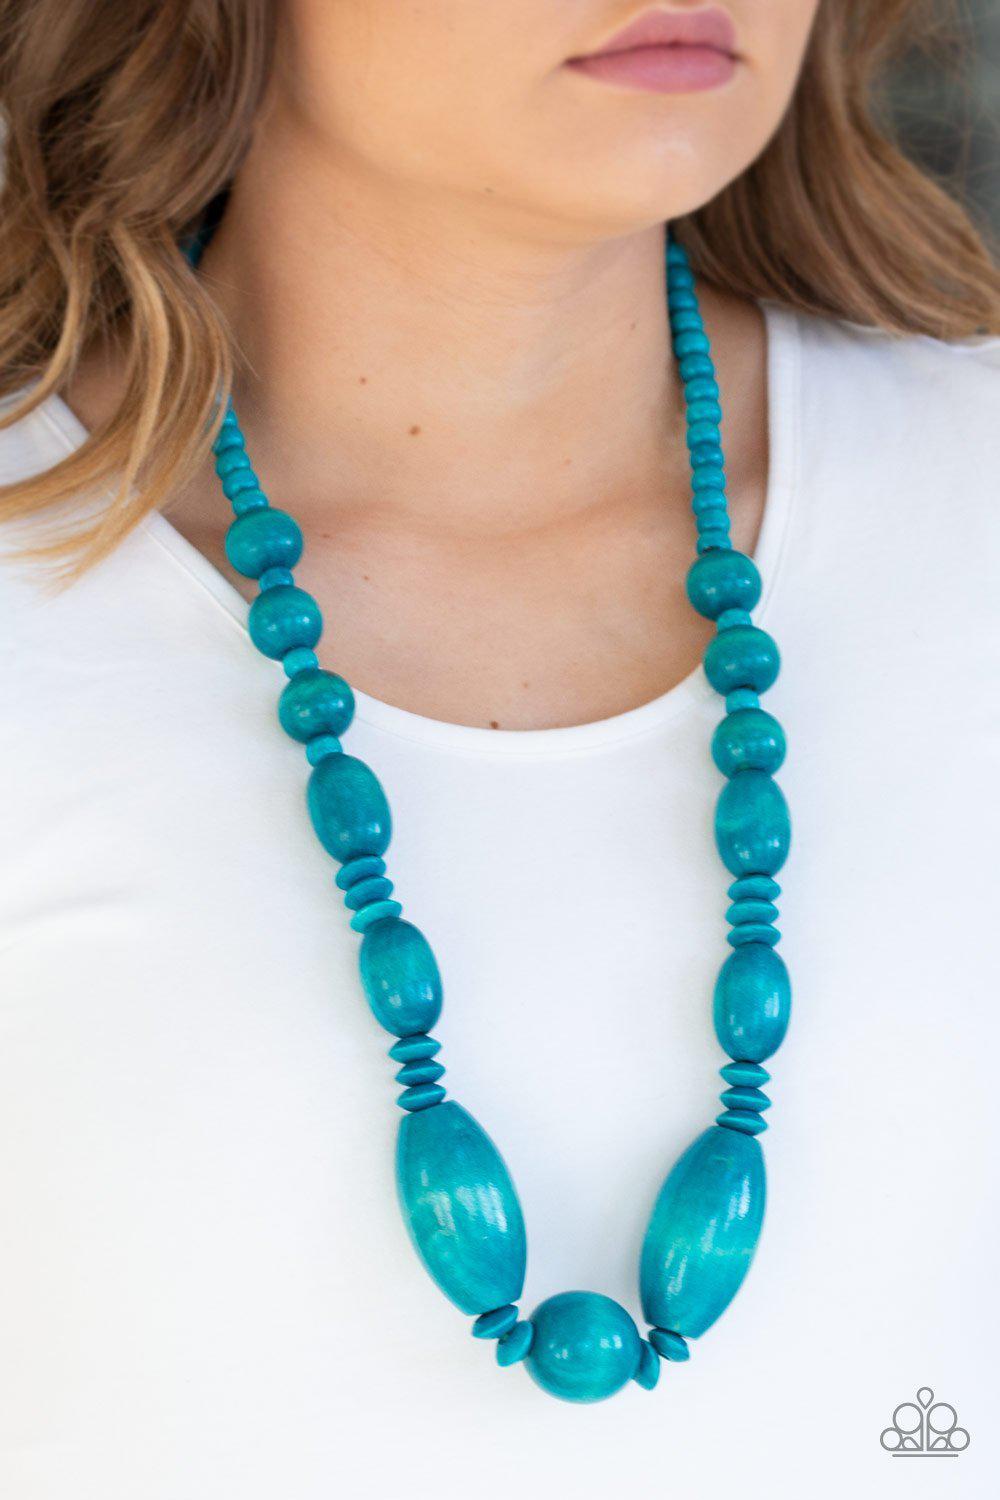 Summer Breezin' Blue Wood Necklace and matching Earrings - Paparazzi Accessories-CarasShop.com - $5 Jewelry by Cara Jewels